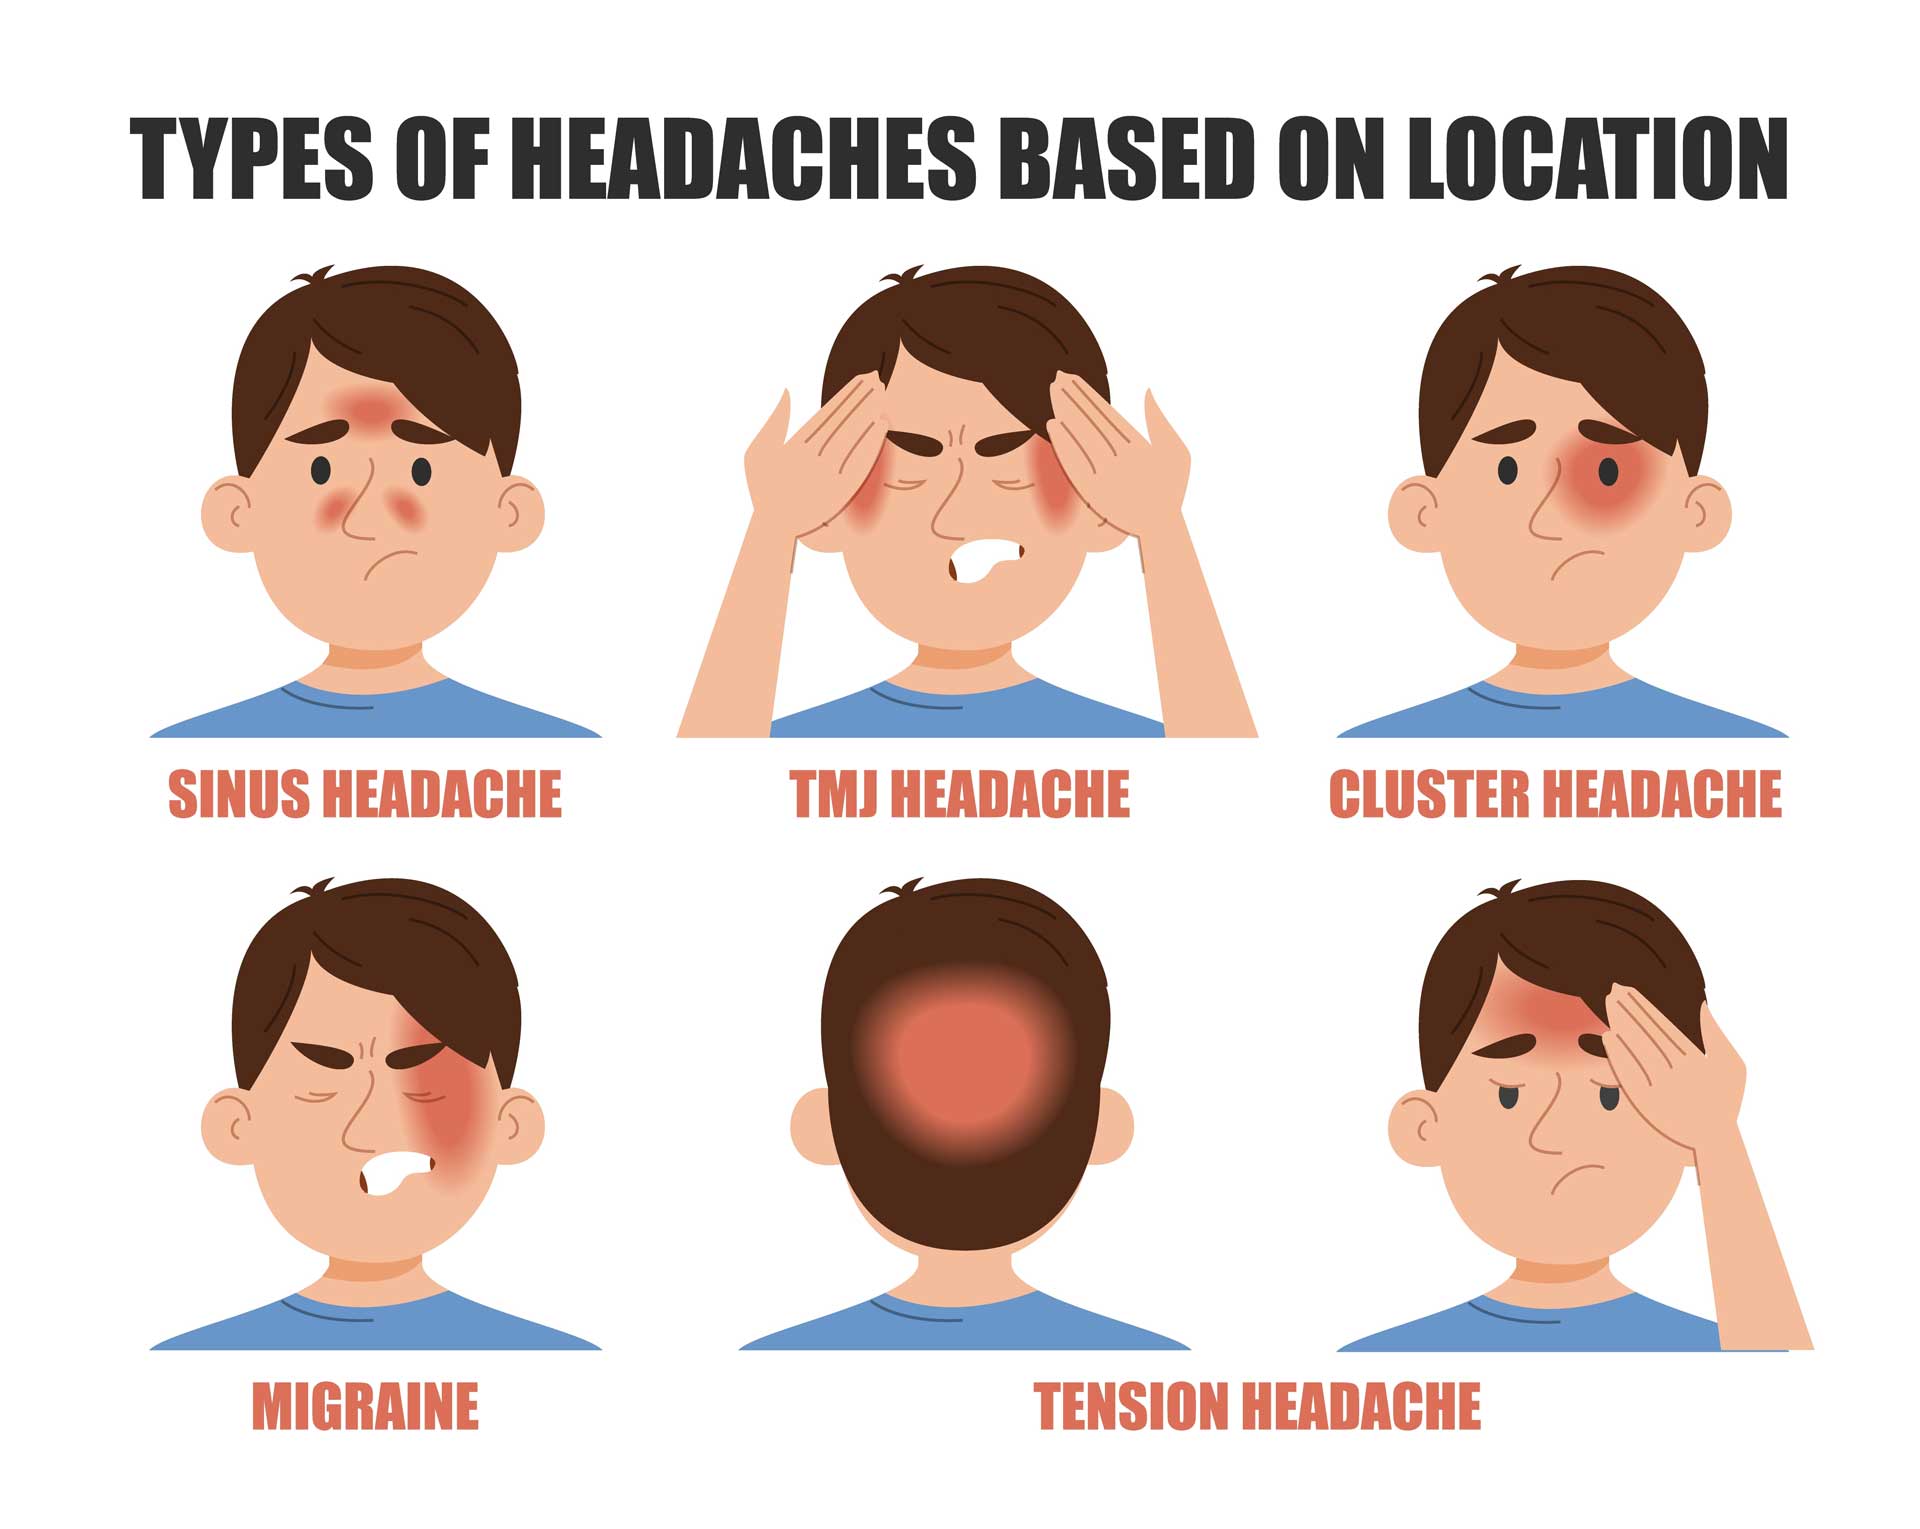 Is it a Tension Headache or Migraine? Or Could it Be Both?